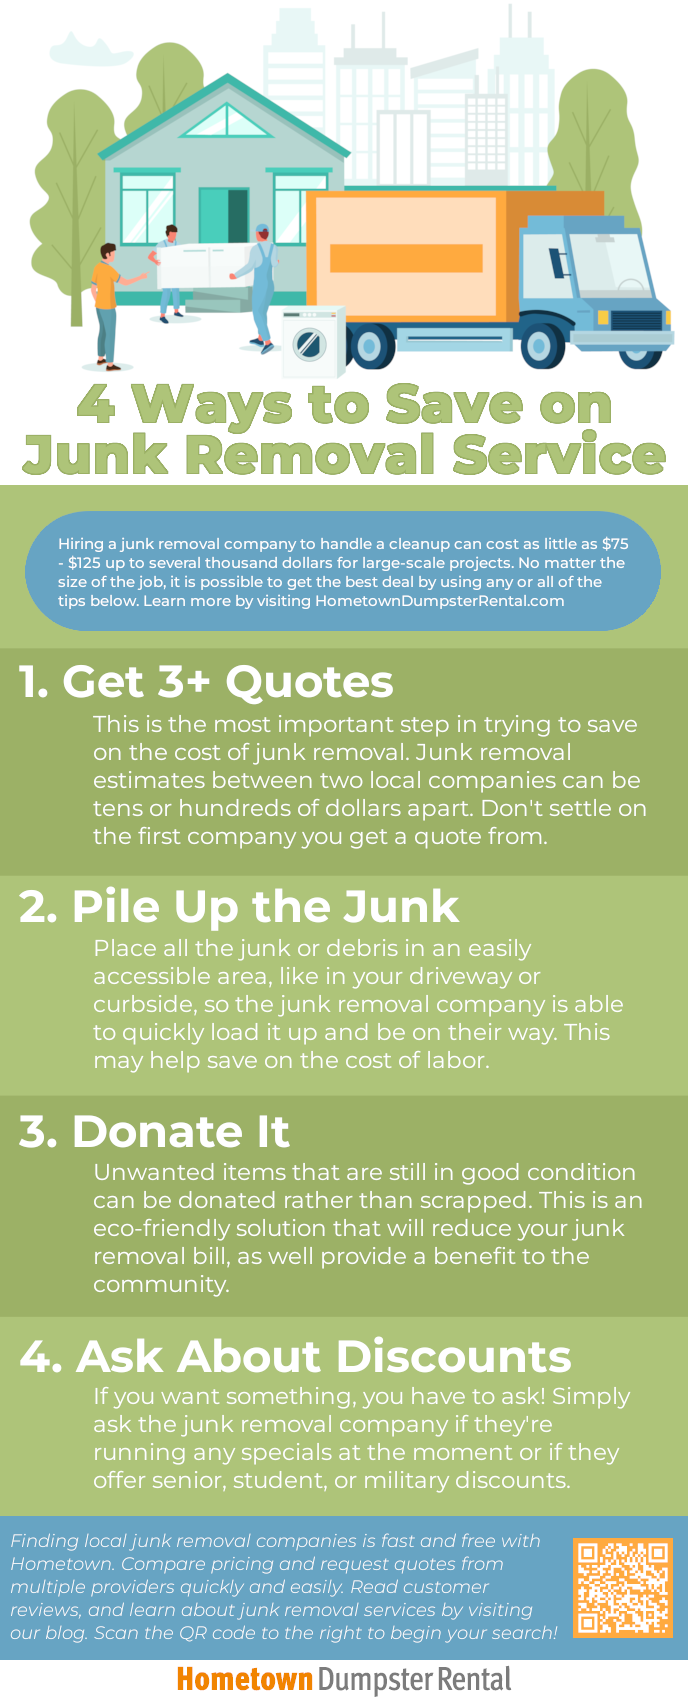 Four ways to save on junk removal service costs infographic